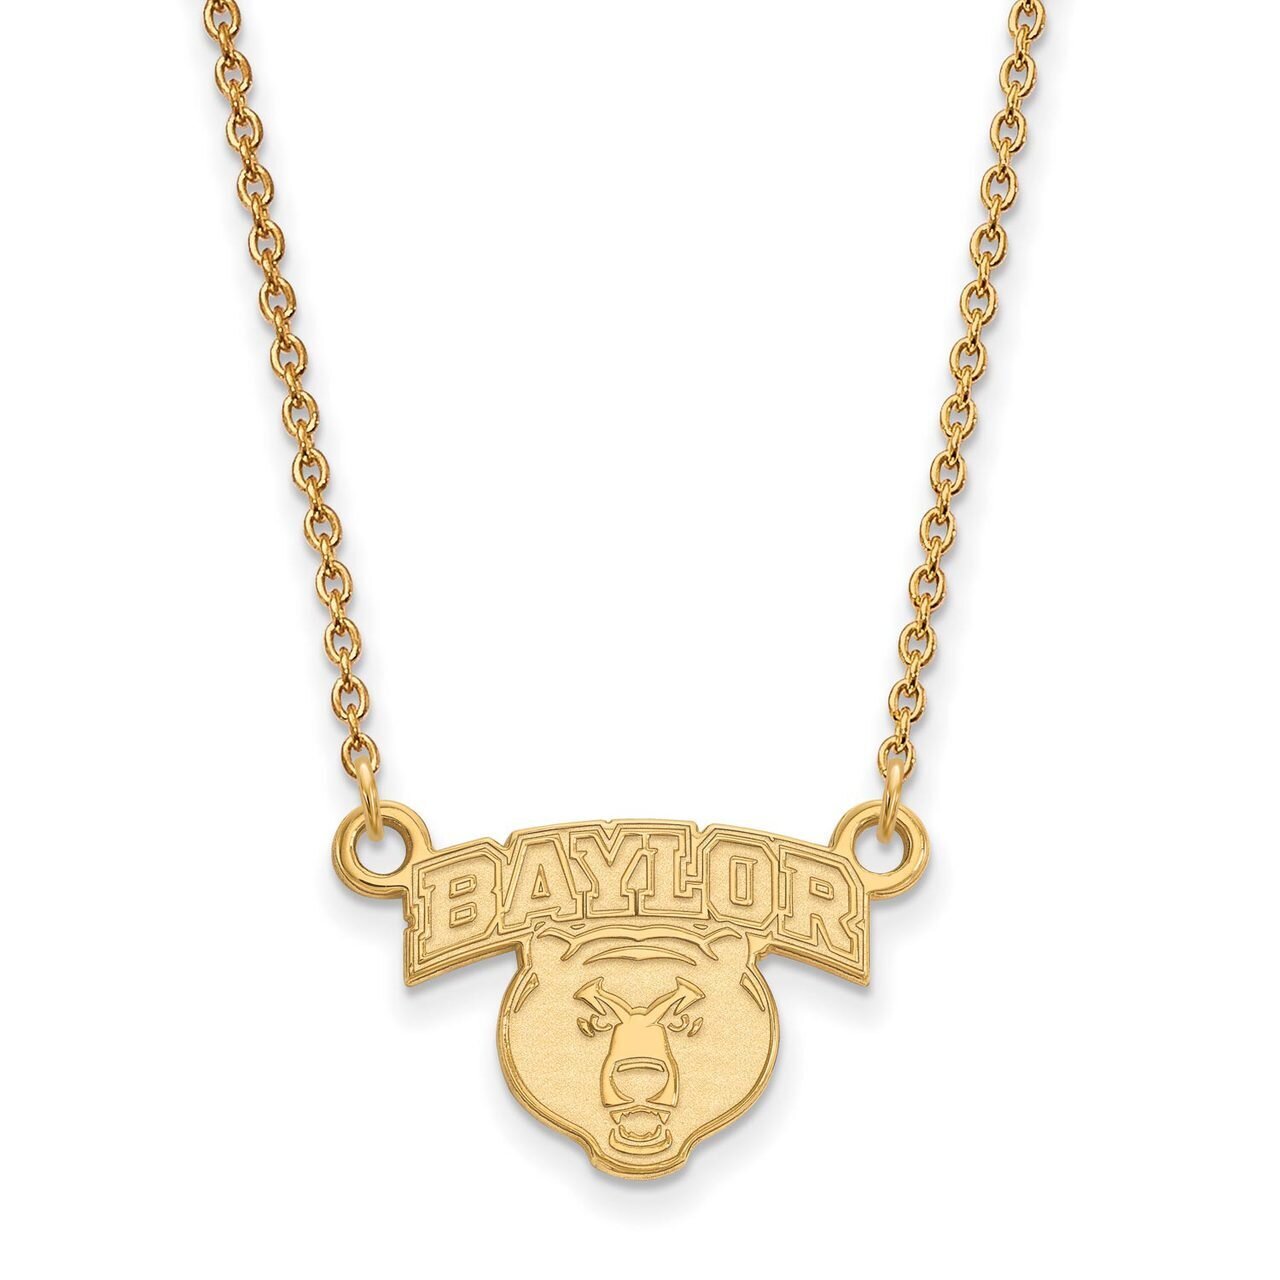 Baylor University Small Pendant with Chain Necklace 14k Yellow Gold 4Y030BU-18